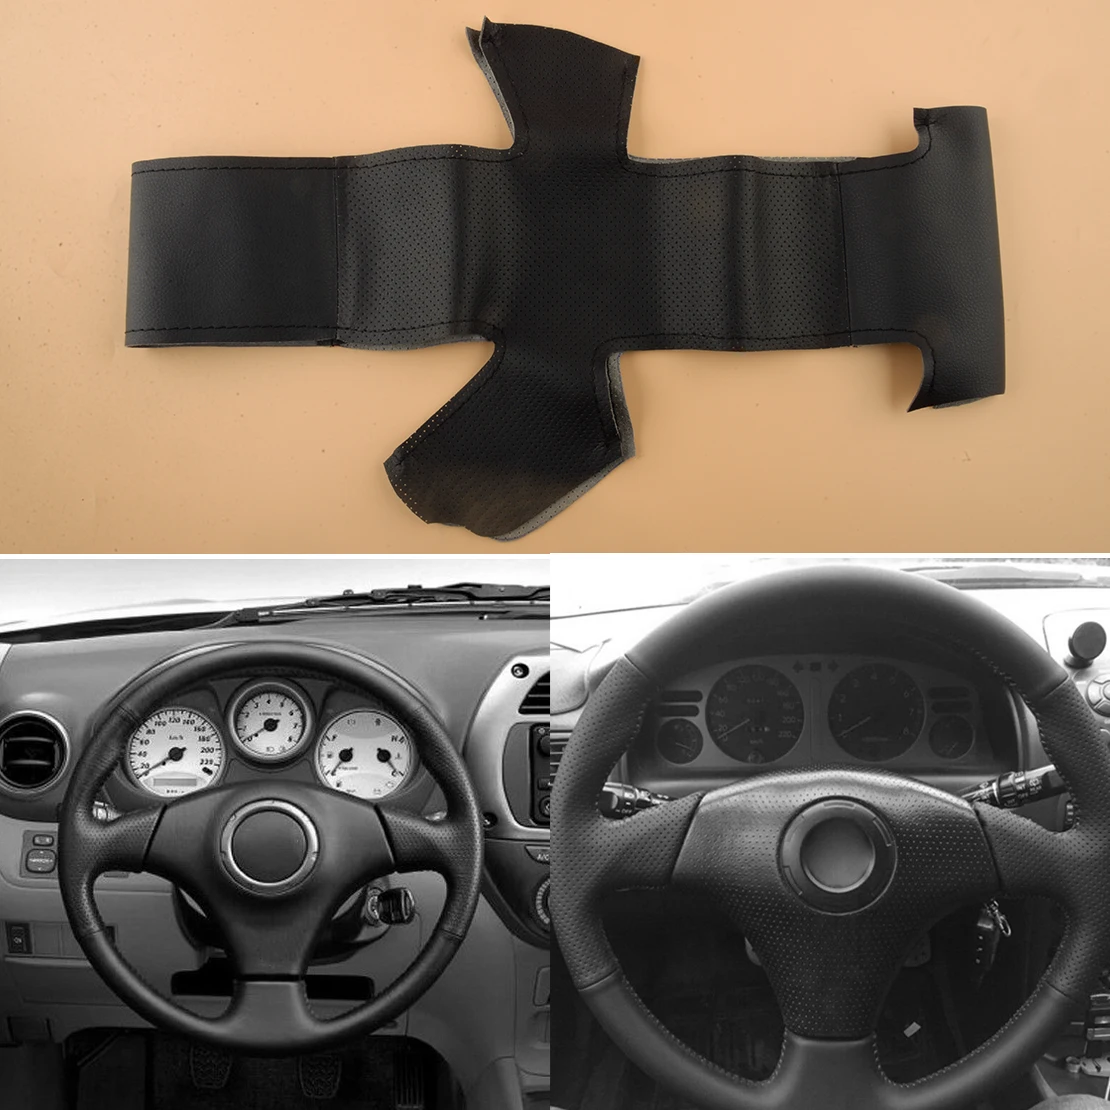 

Hand Sewing Steering Wheel Cover Black PU Leather Fit for Toyota RAV4 Celica Corolla Matrix MR2 Lexus IS200 300 2003